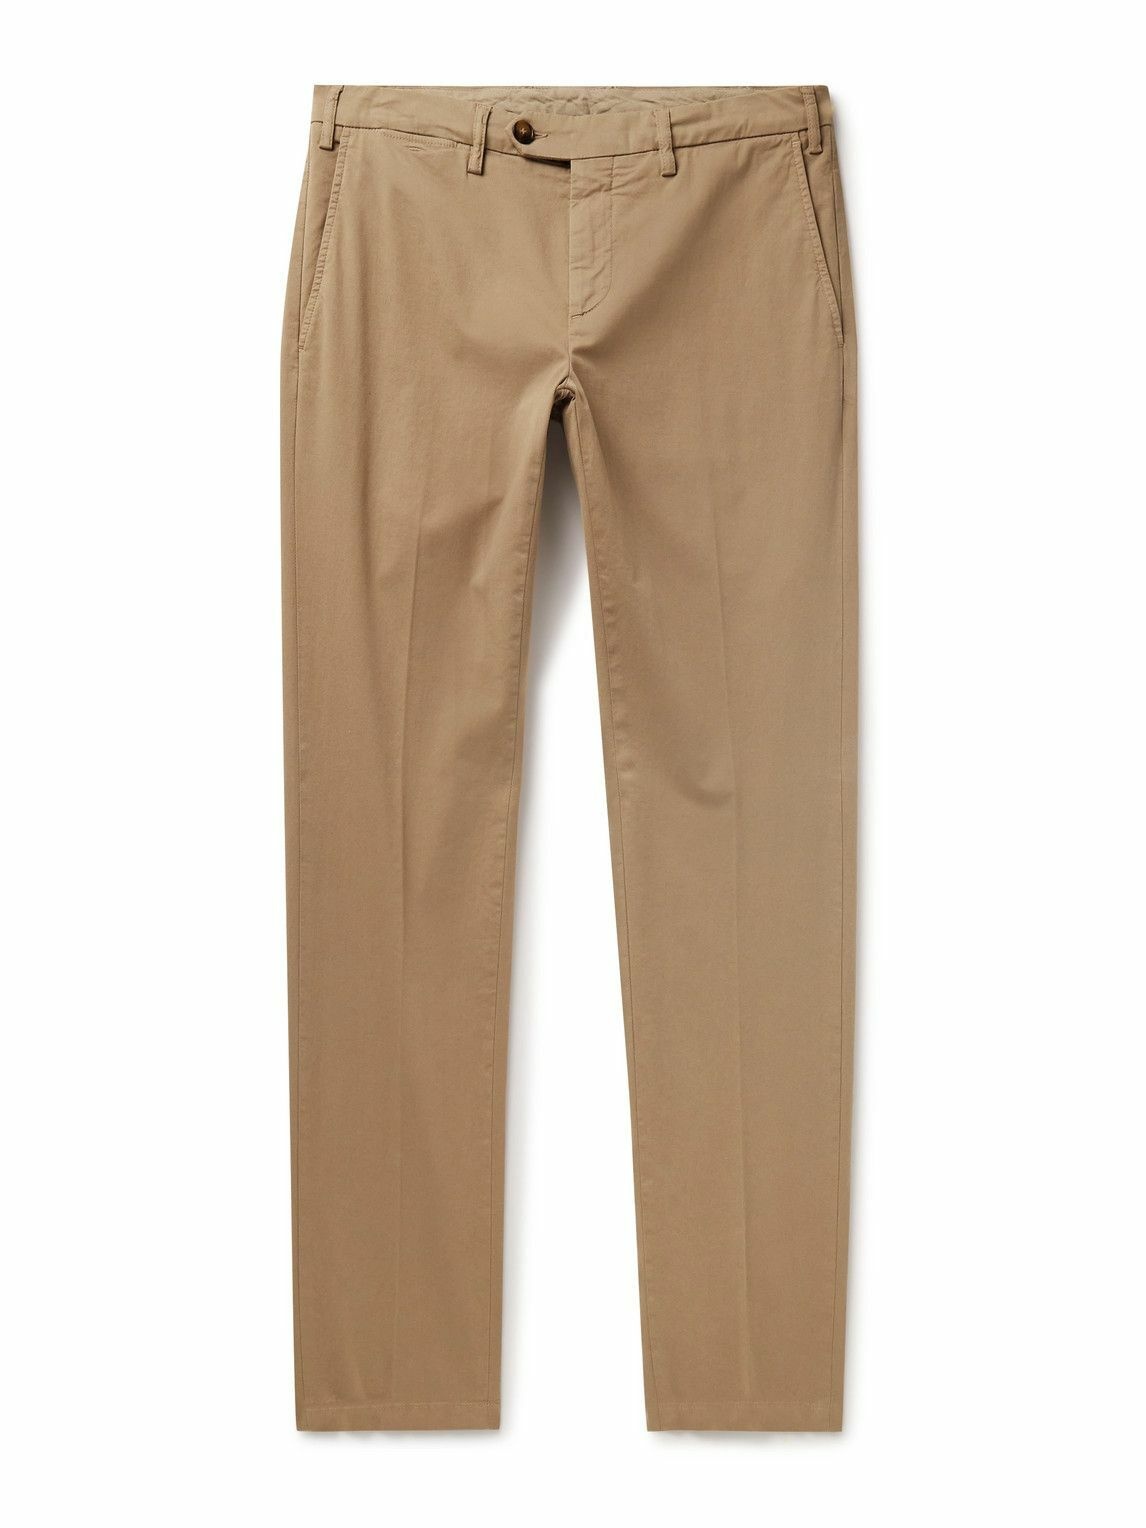 Photo: Canali - Slim-Fit Cotton-Blend Twill Chinos - Brown